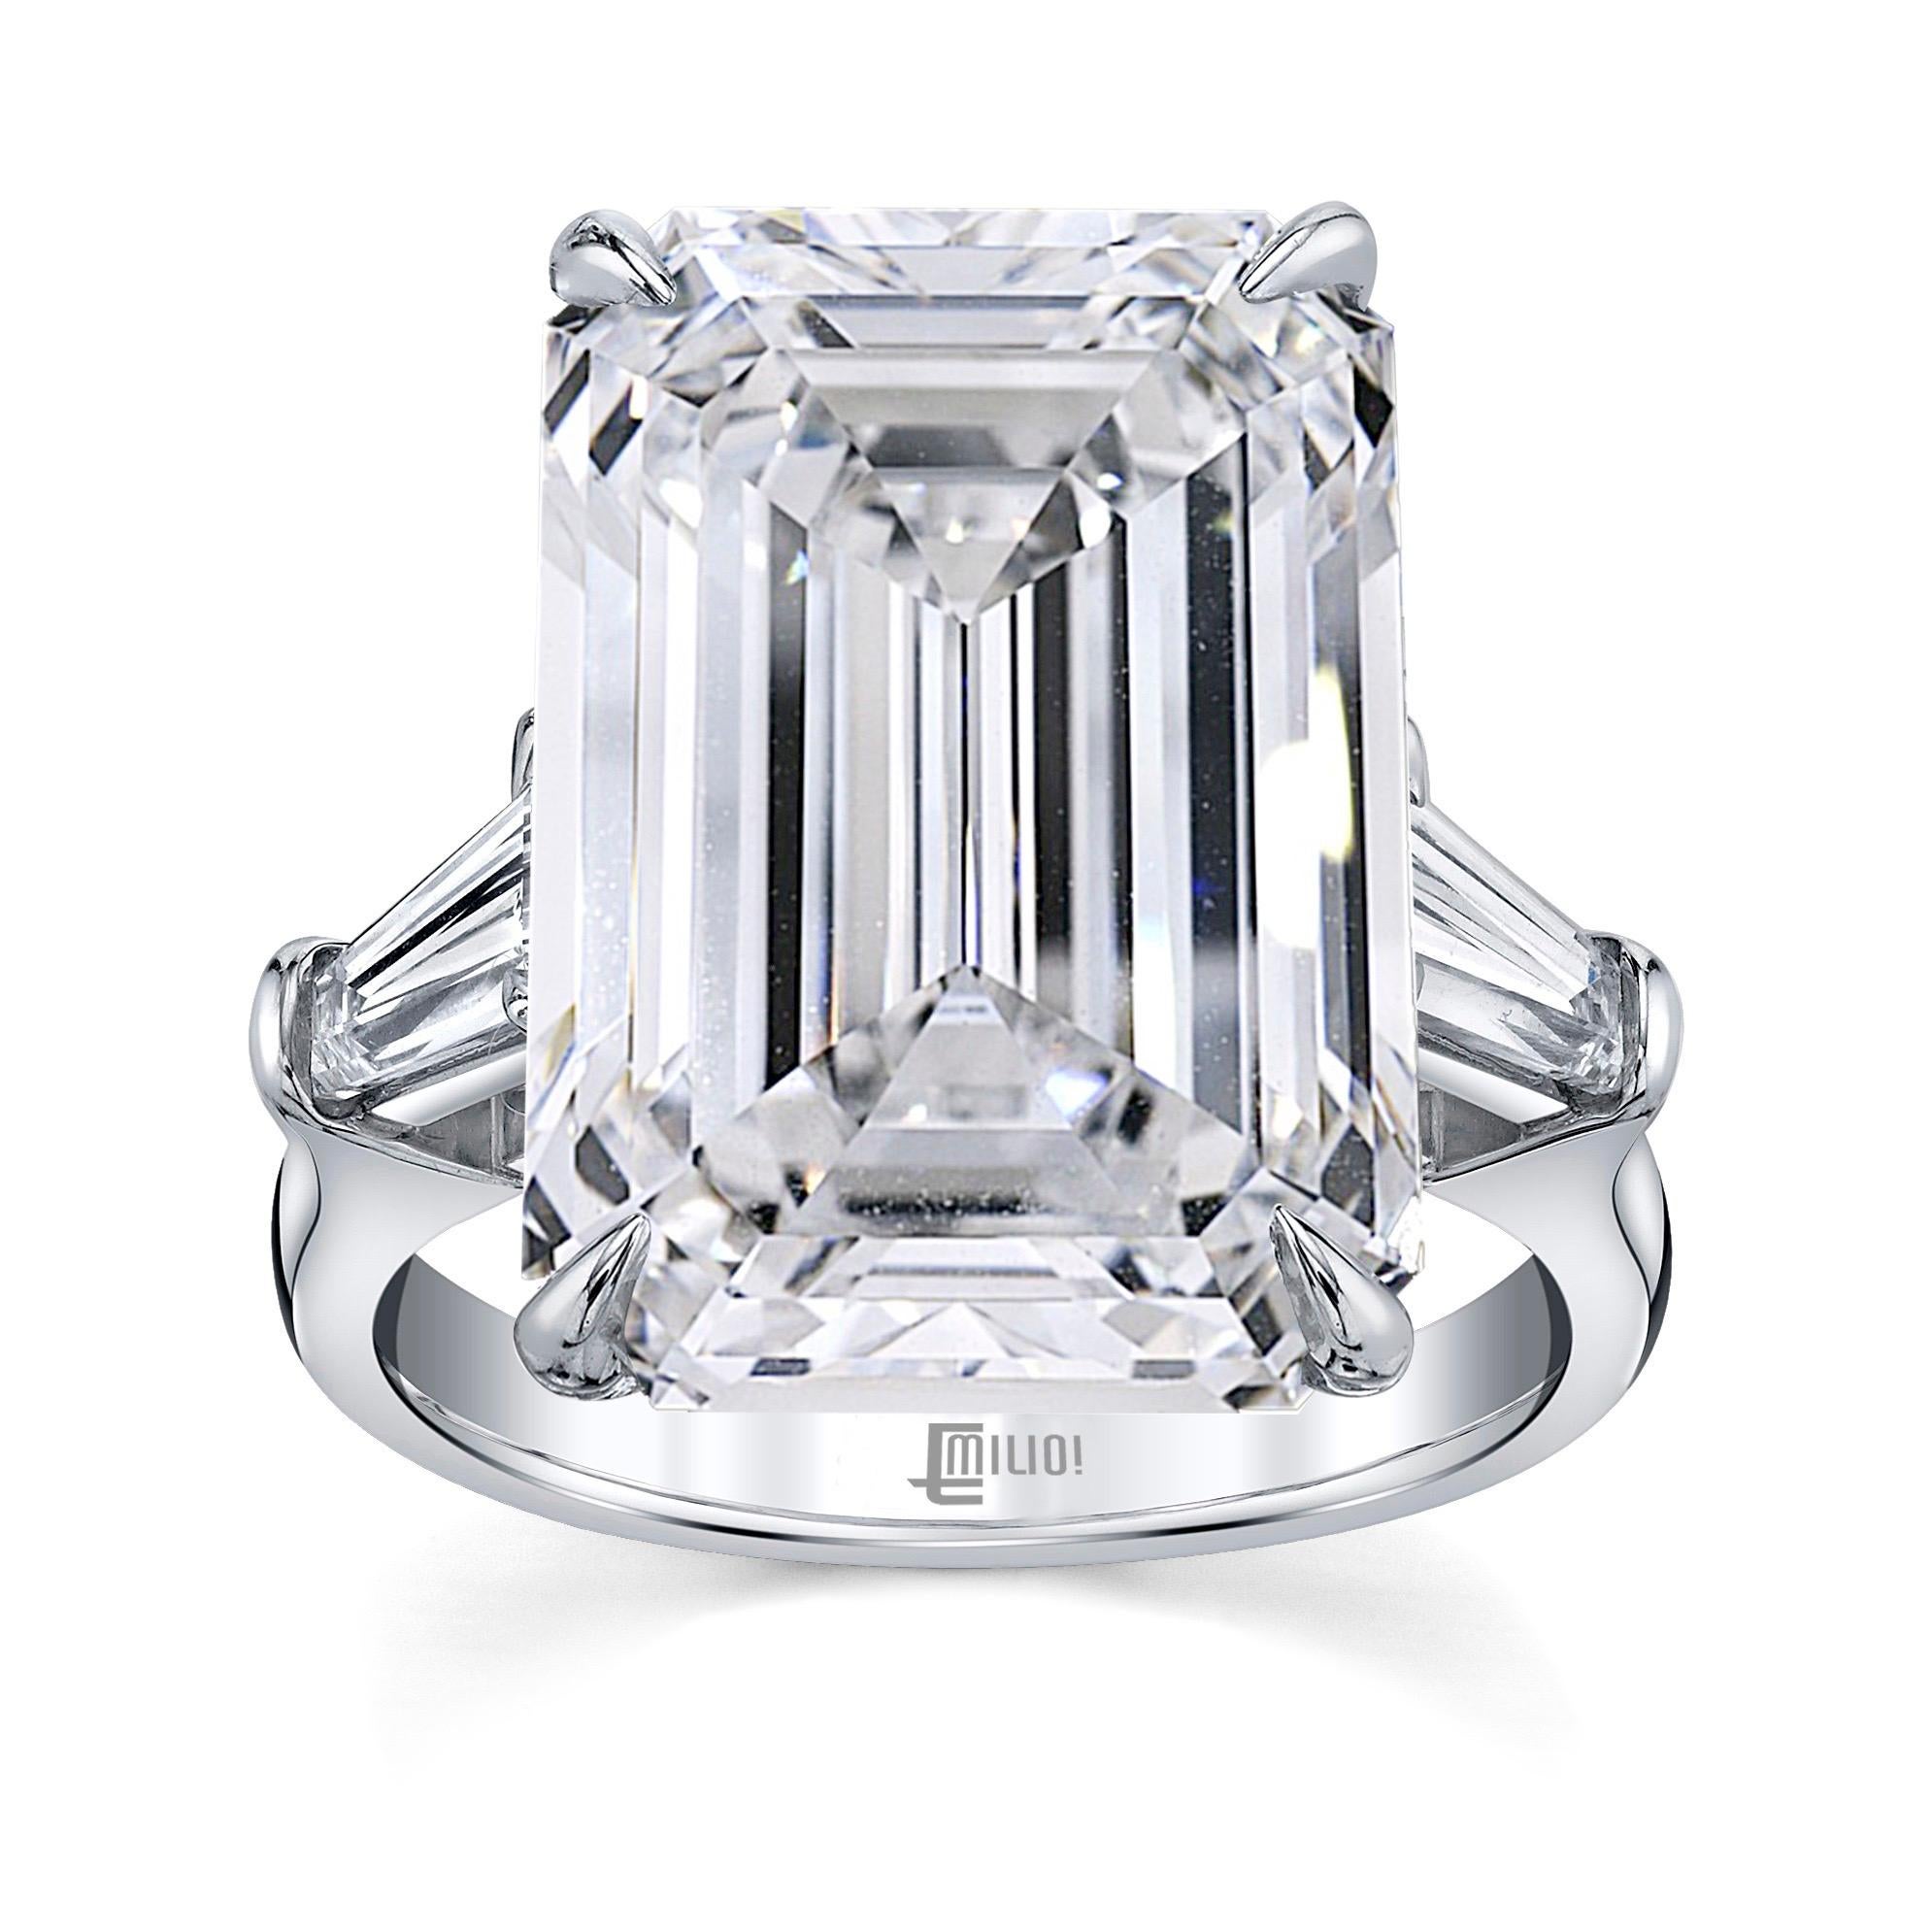 From the Museum vault at Emilio Jewelry, Located On New York’s Iconic Fifth Avenue:
Showcasing a magnificent dream investment emerald cut diamond set in the center. The shape and proportions are very unique and extremely desirable. Video available